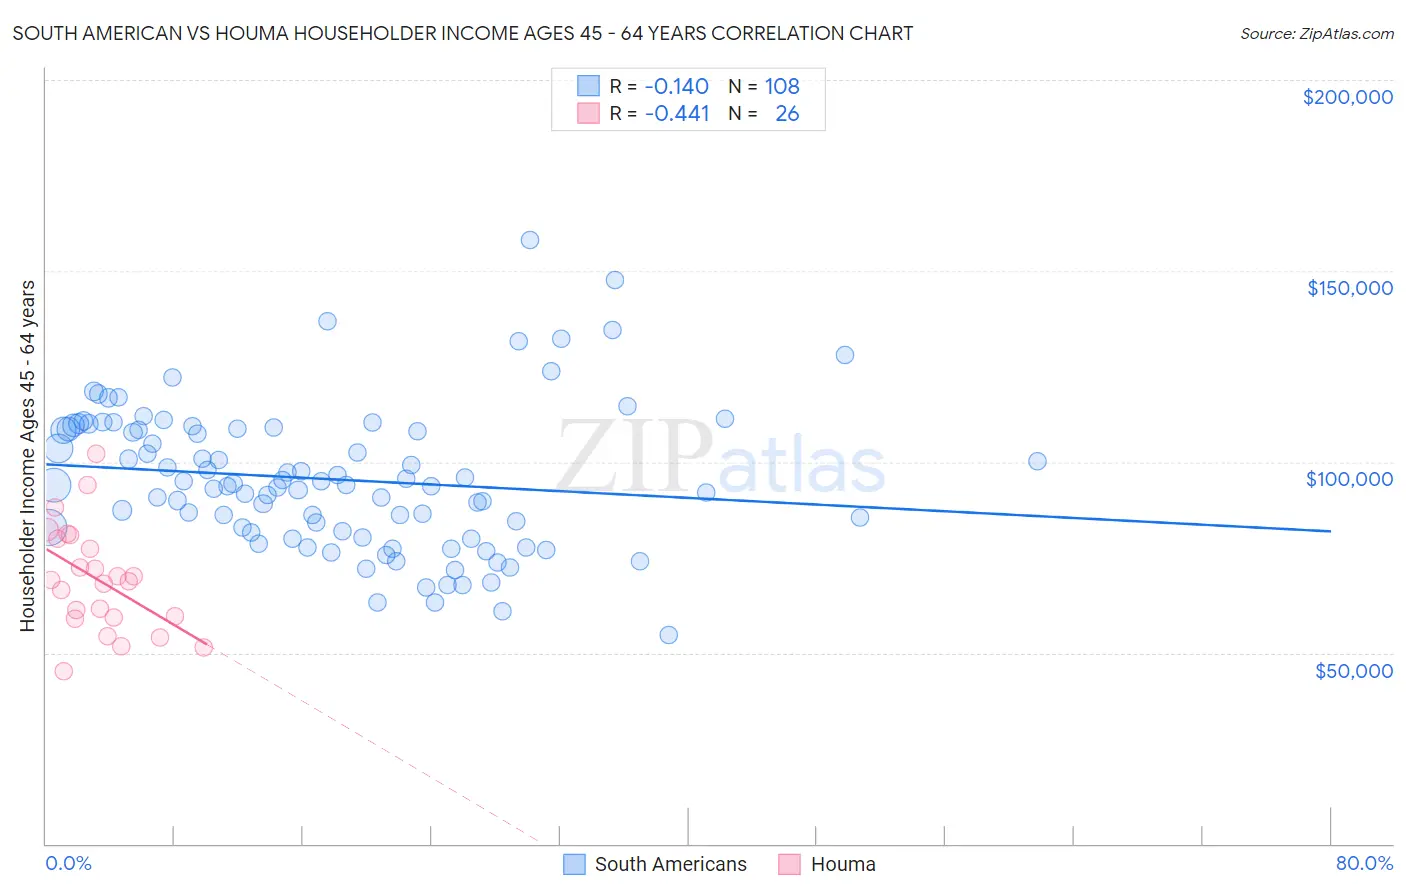 South American vs Houma Householder Income Ages 45 - 64 years